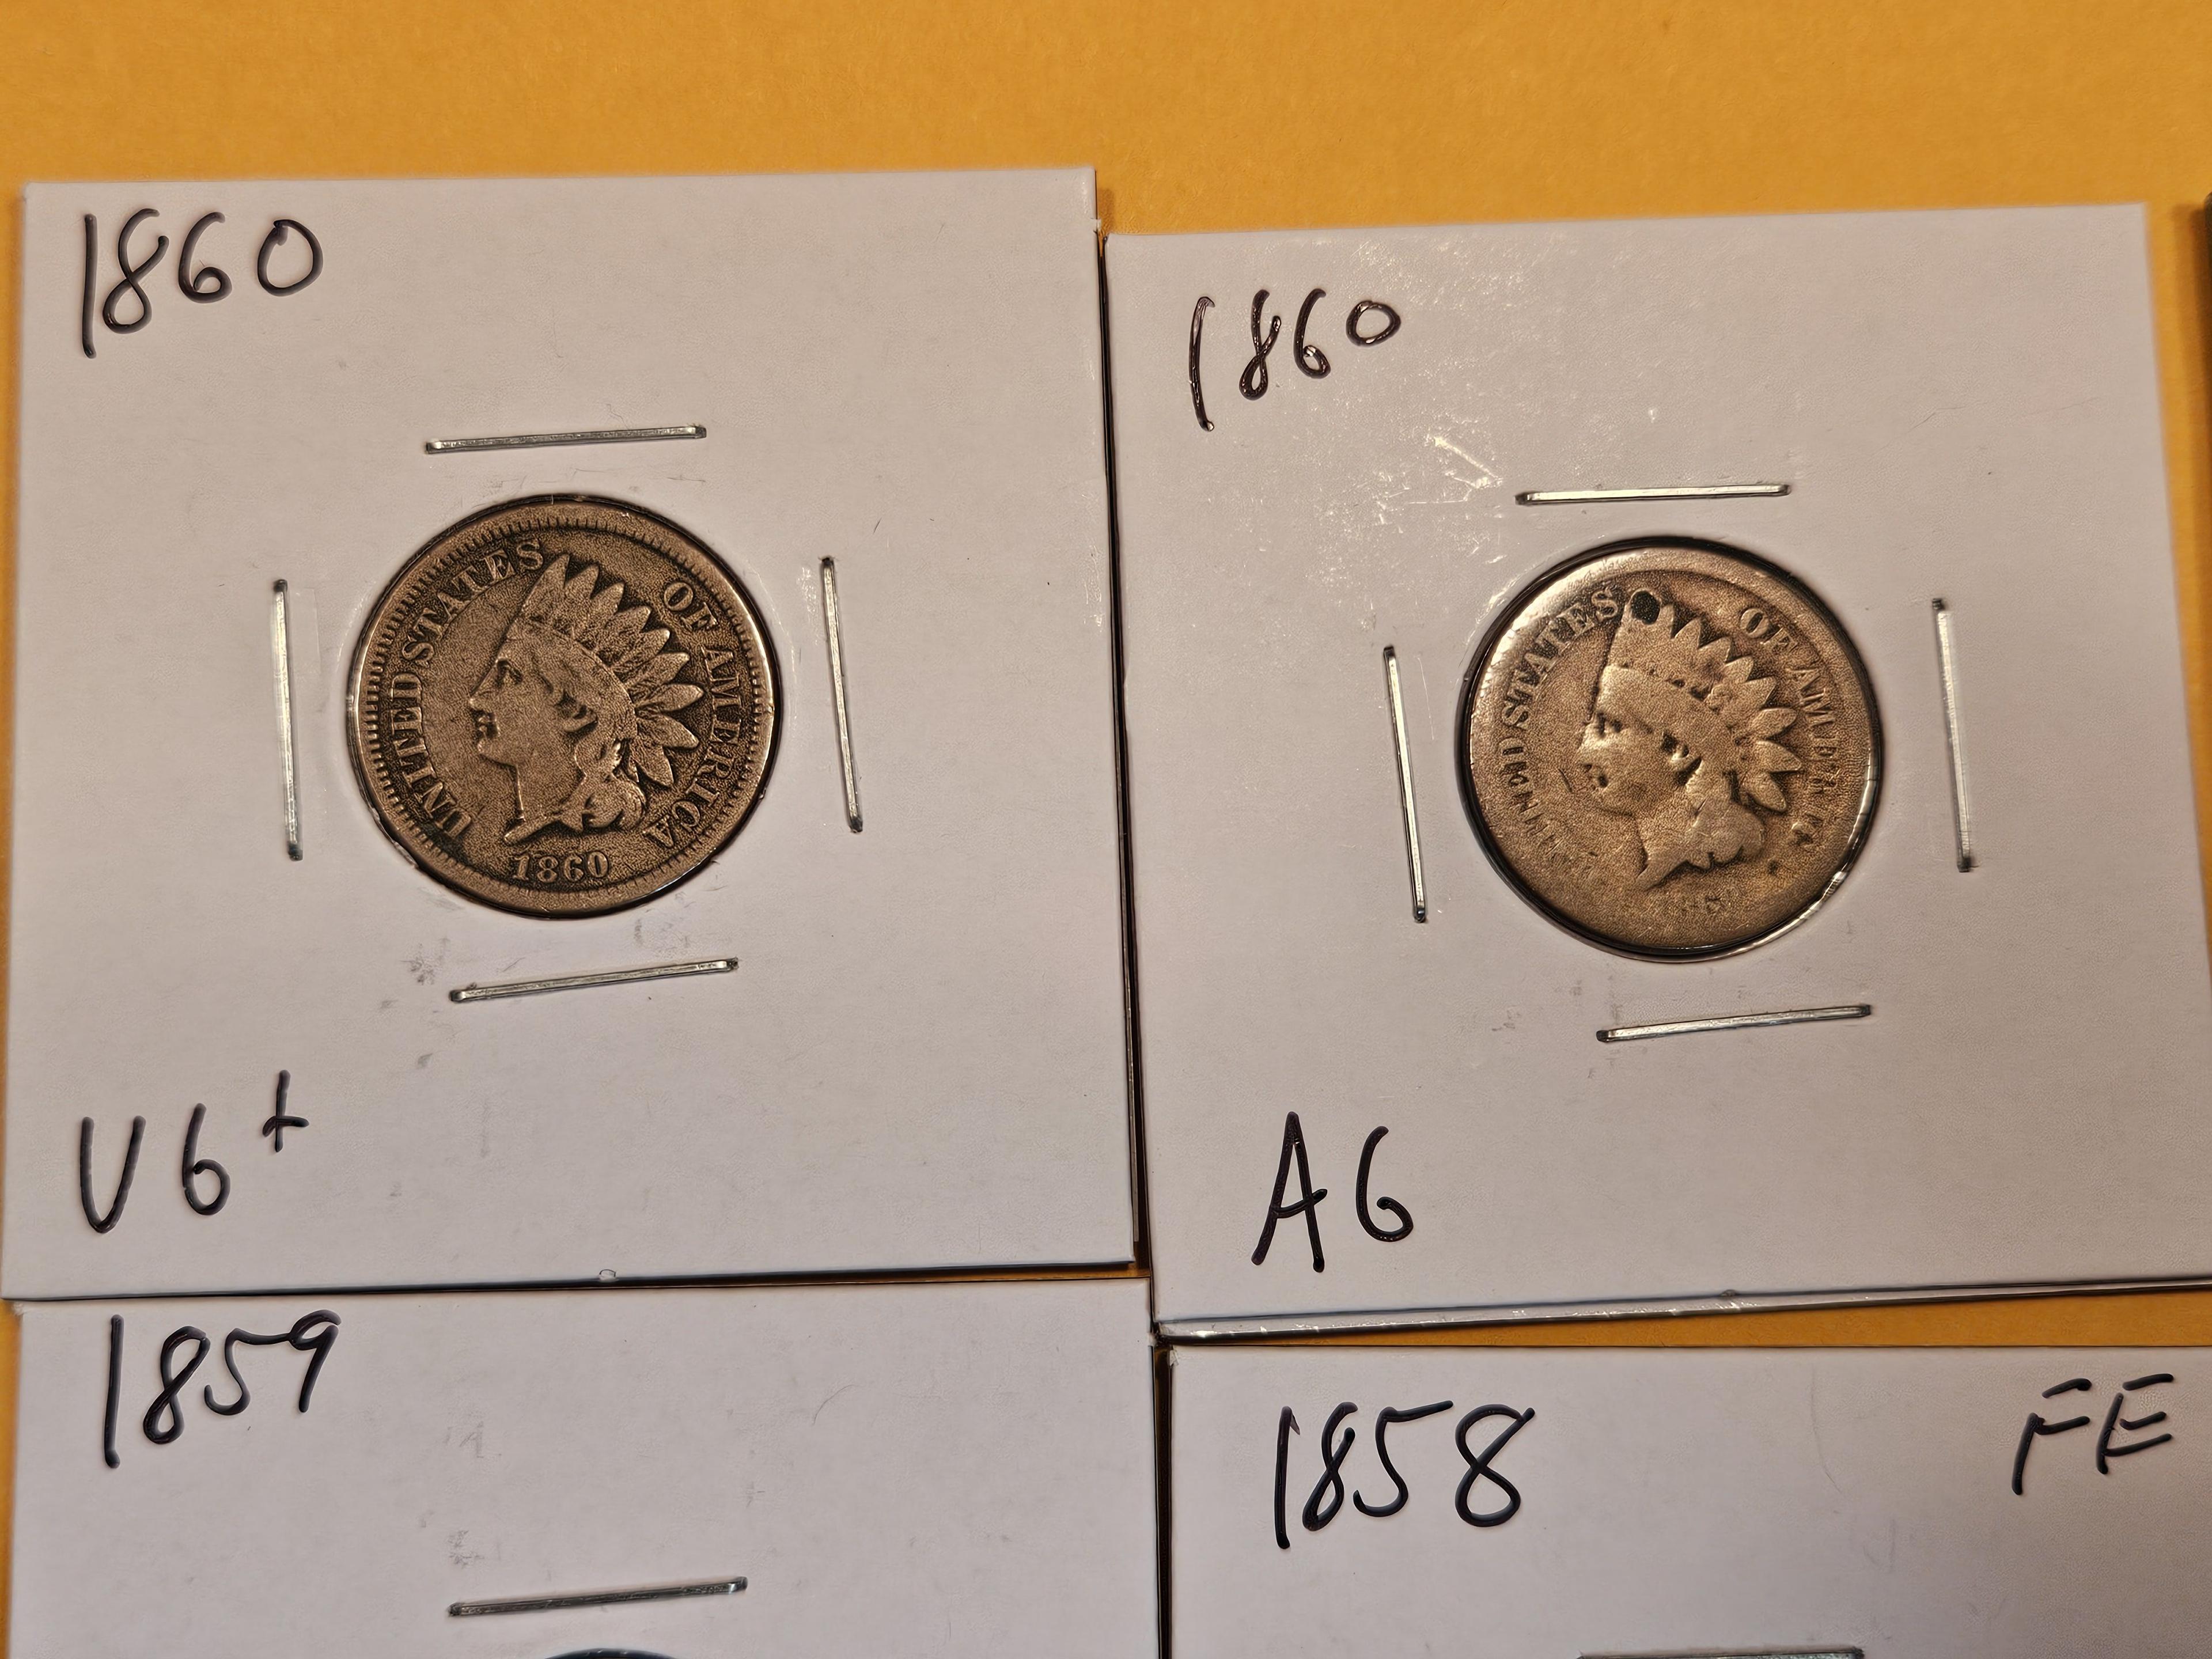 Seven Small Copper-Nickel Indian and Flying Eagle Cents